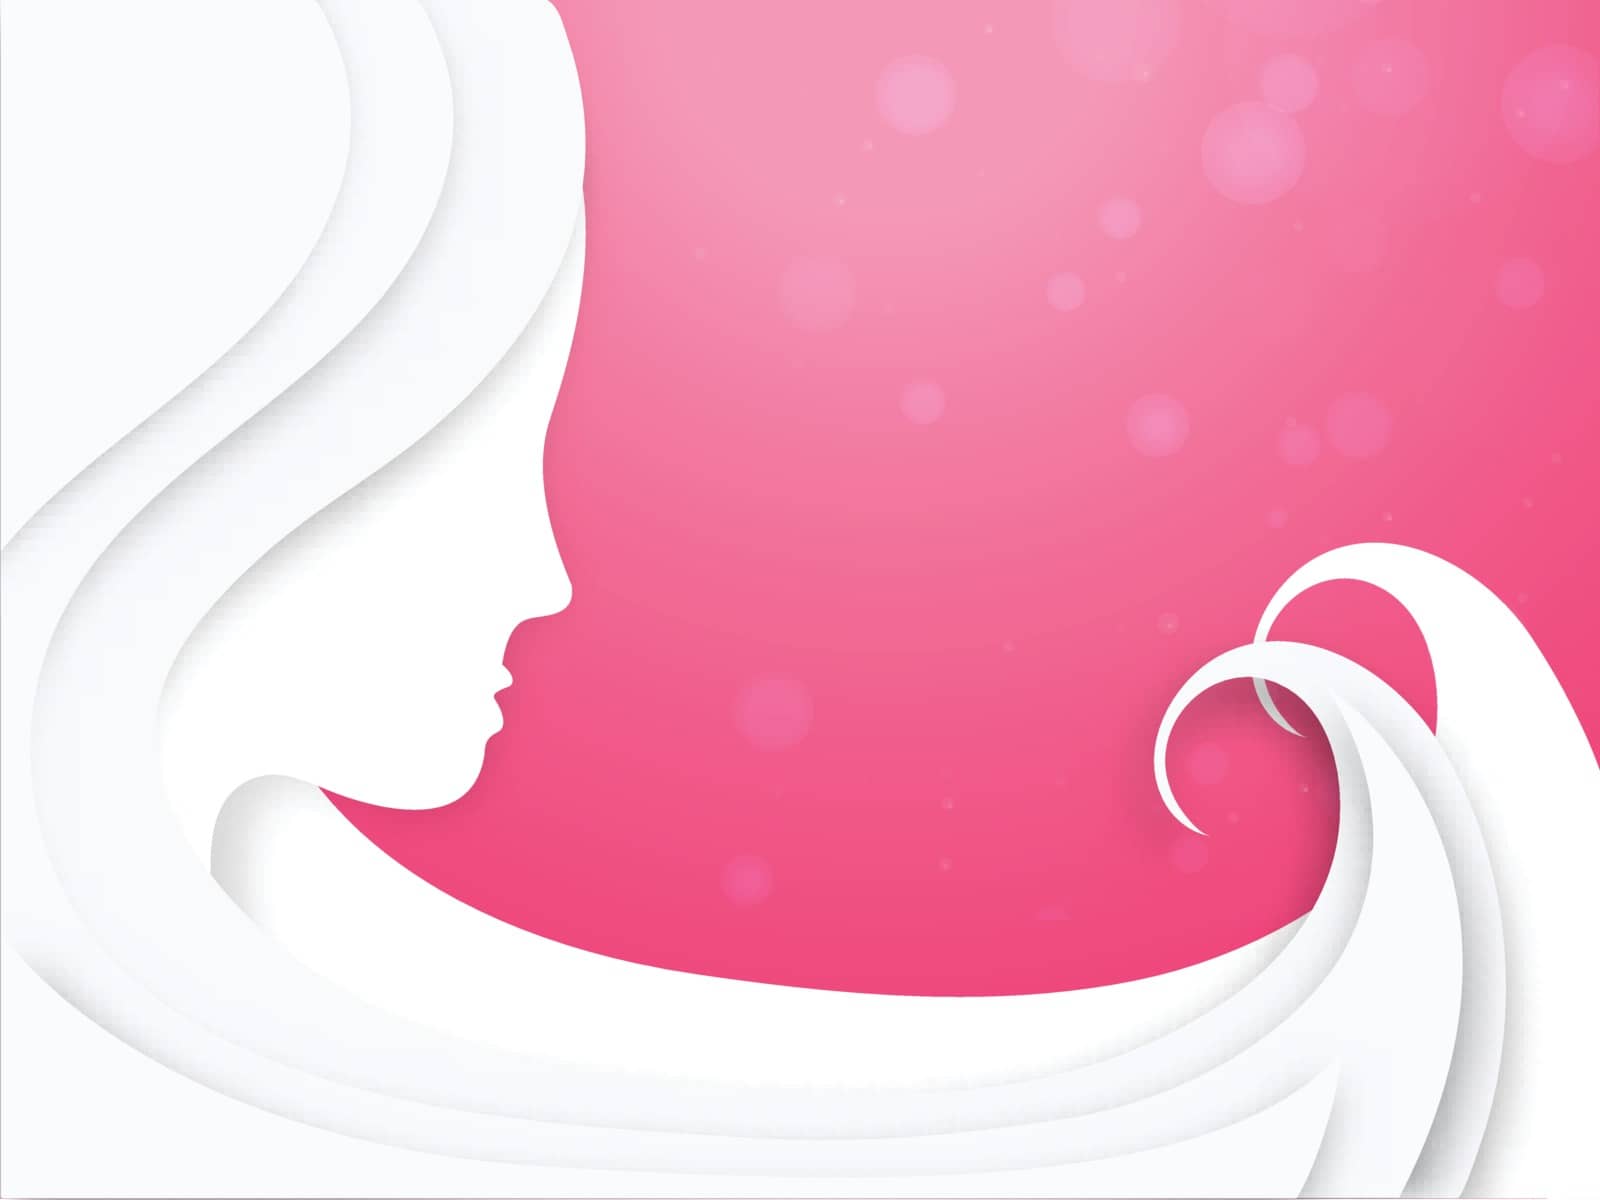 Paper cut style woman face on glossy pink background for women's day celebration poster or banner design.